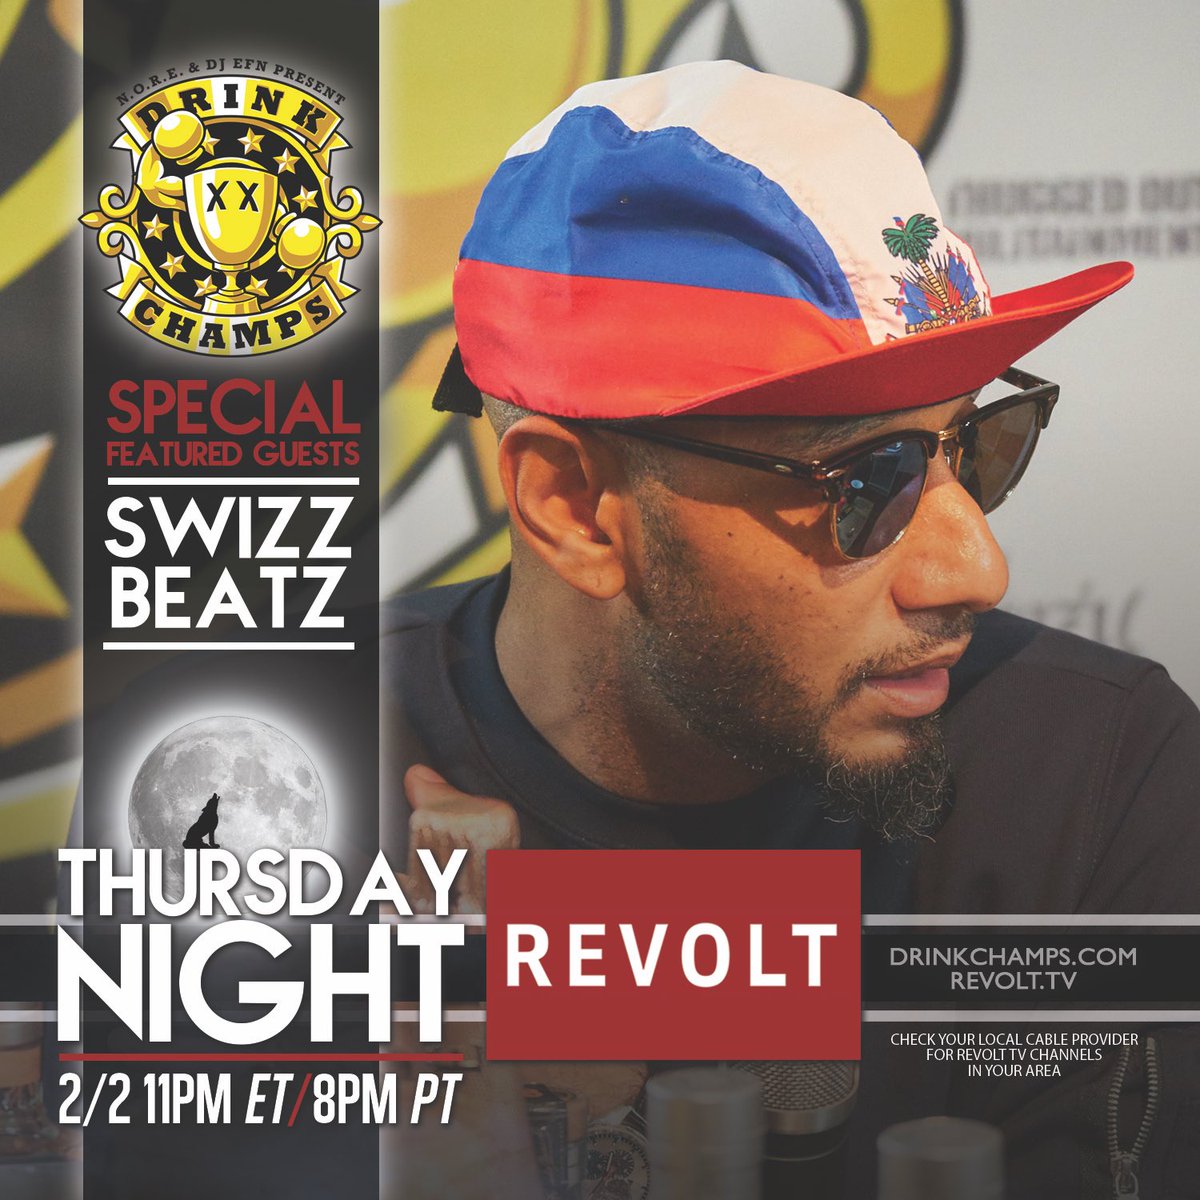 RT @djEFN: Get your popcorn ready! Tonight! @THEREALSWIZZZ x @Drinkchamps on @RevoltTV 11pm ET https://t.co/bZUKW638Vd